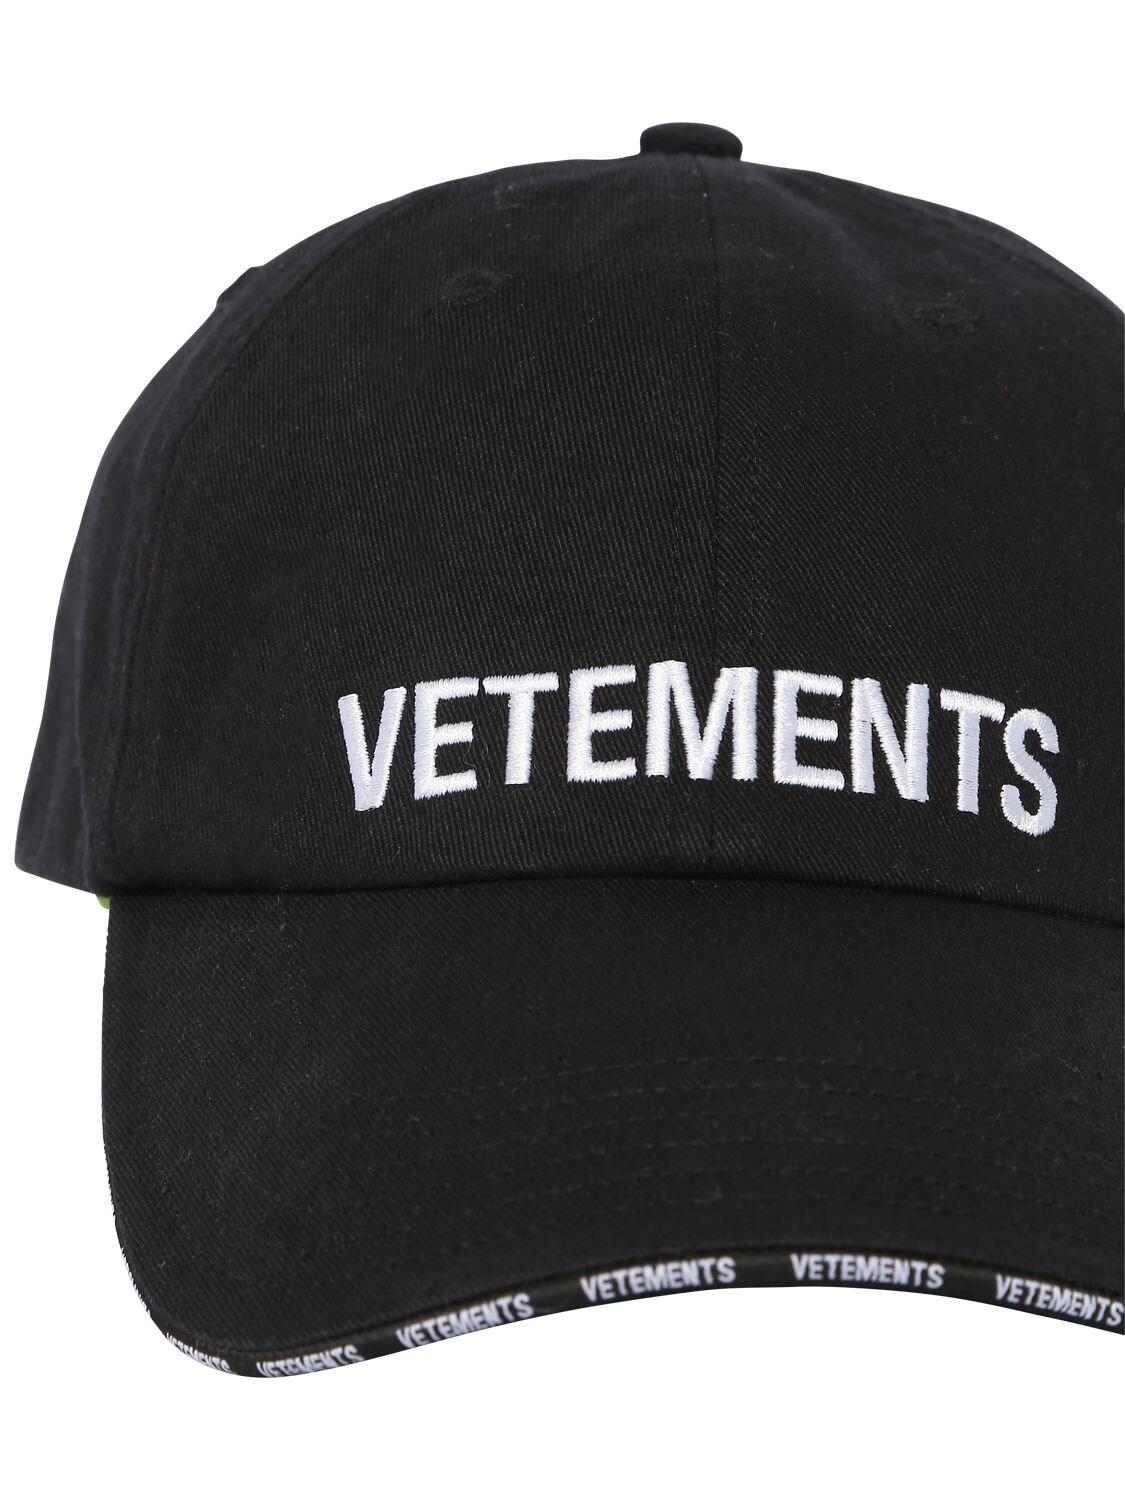 Vetements Logo Embroidered Distressed Baseball Cap in Black for Men - Lyst